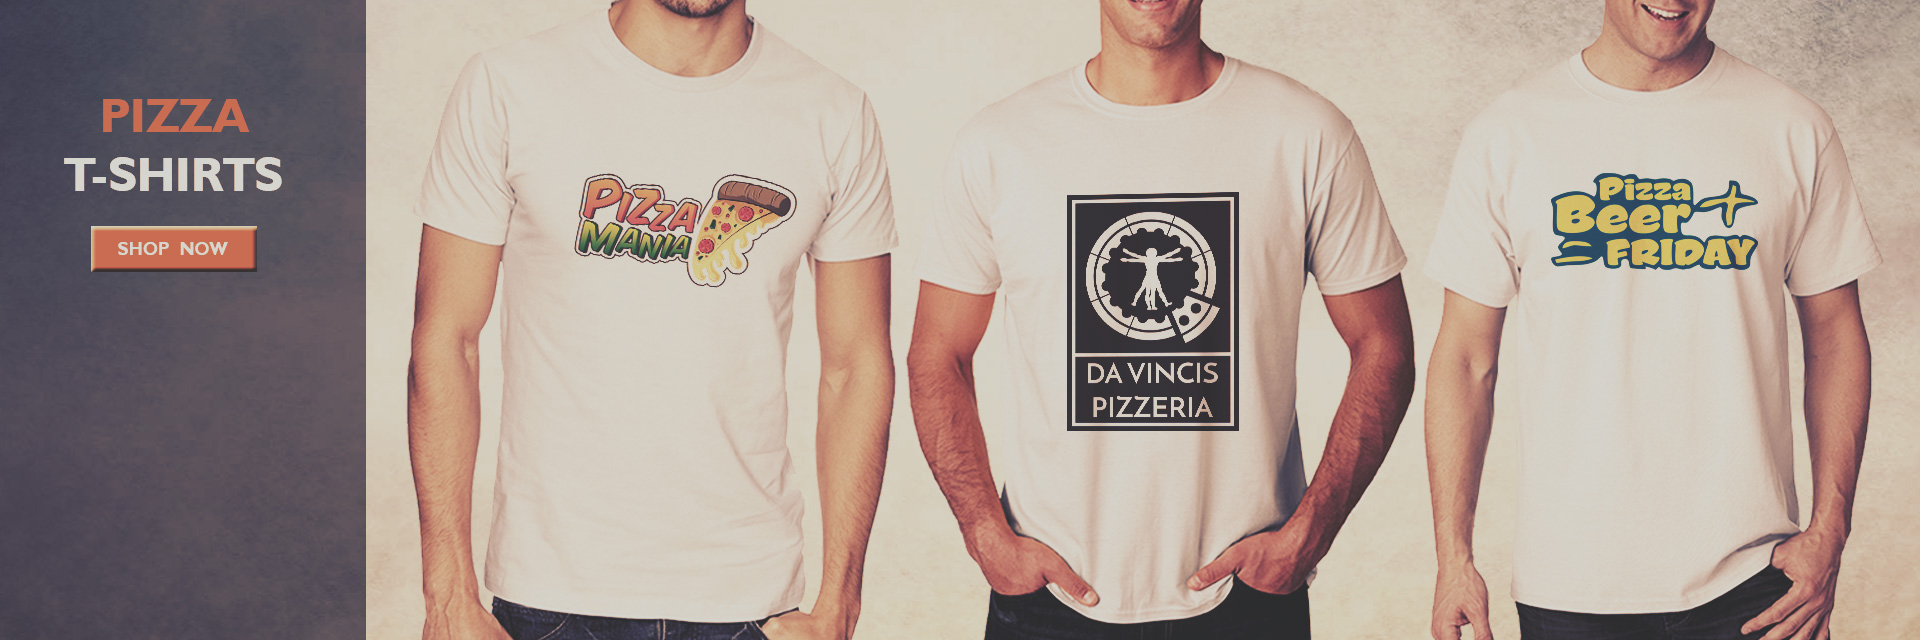 Buy Pizza T-Shirts